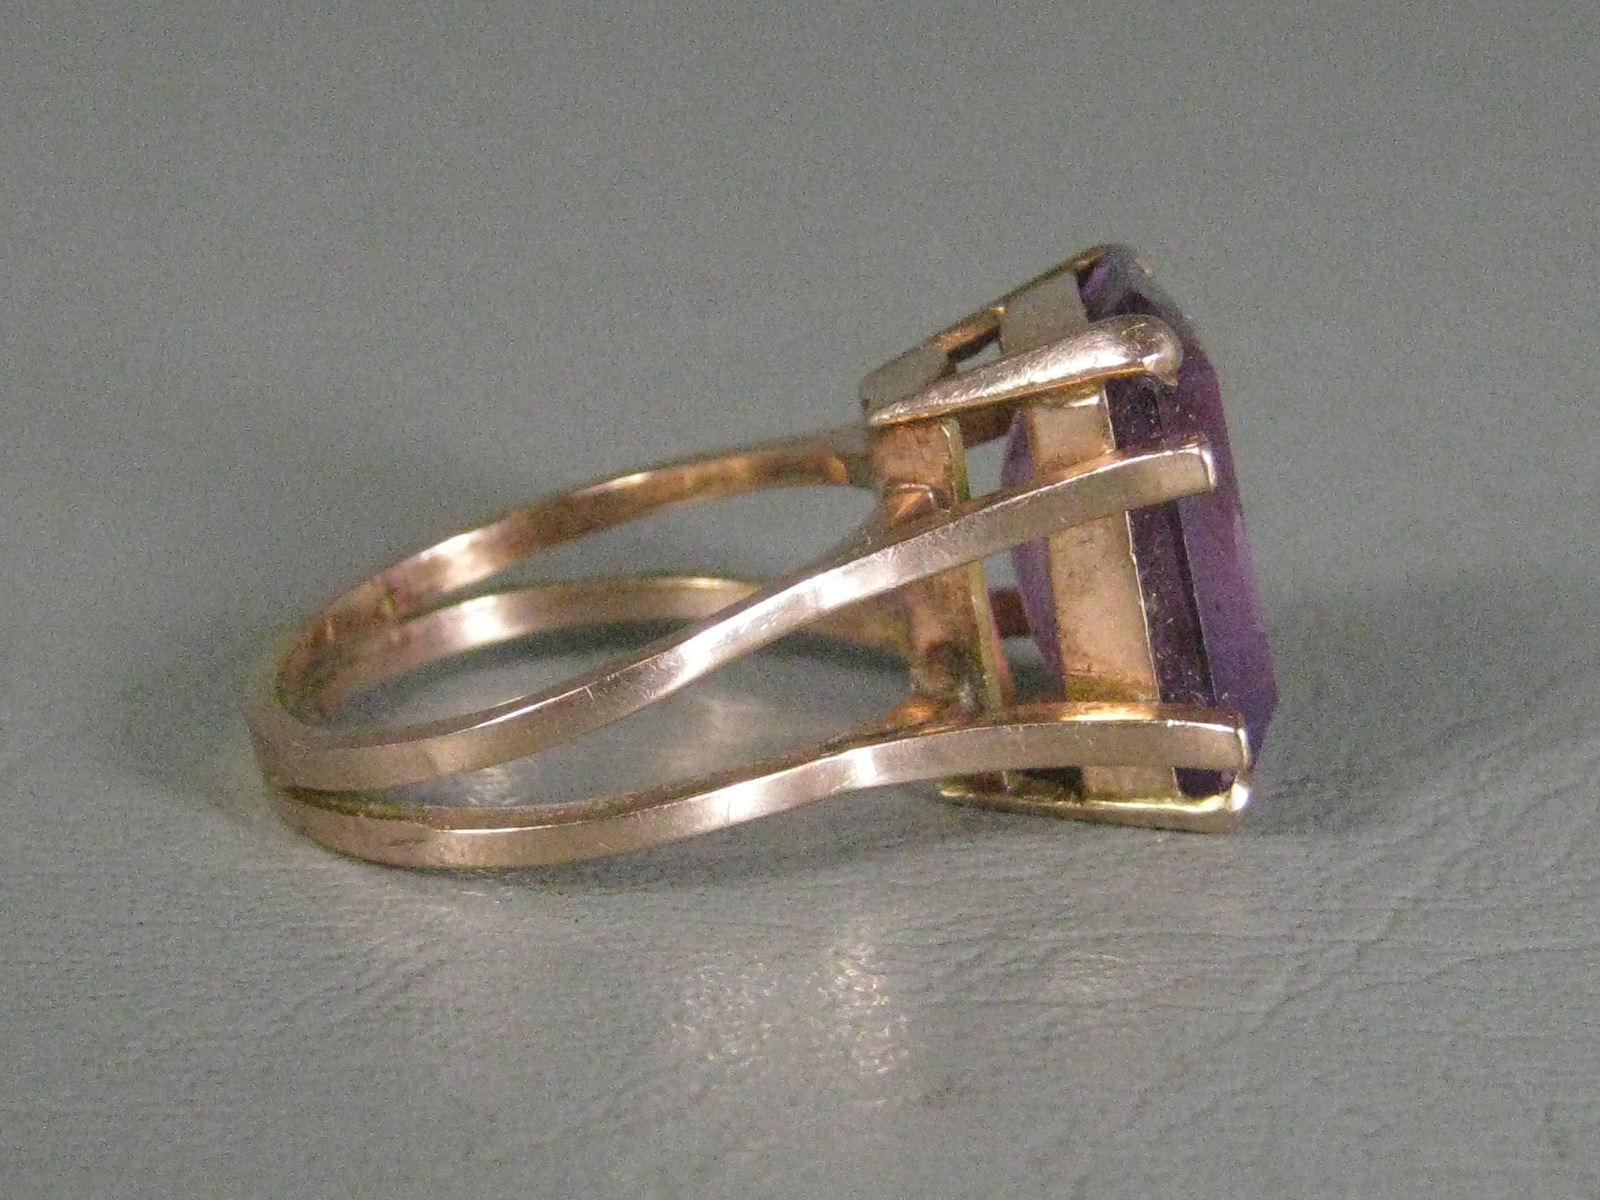 Vintage Antique Amethyst Ring Size 8.25 Estate Jewelry Rose Gold? No Reserve! 6